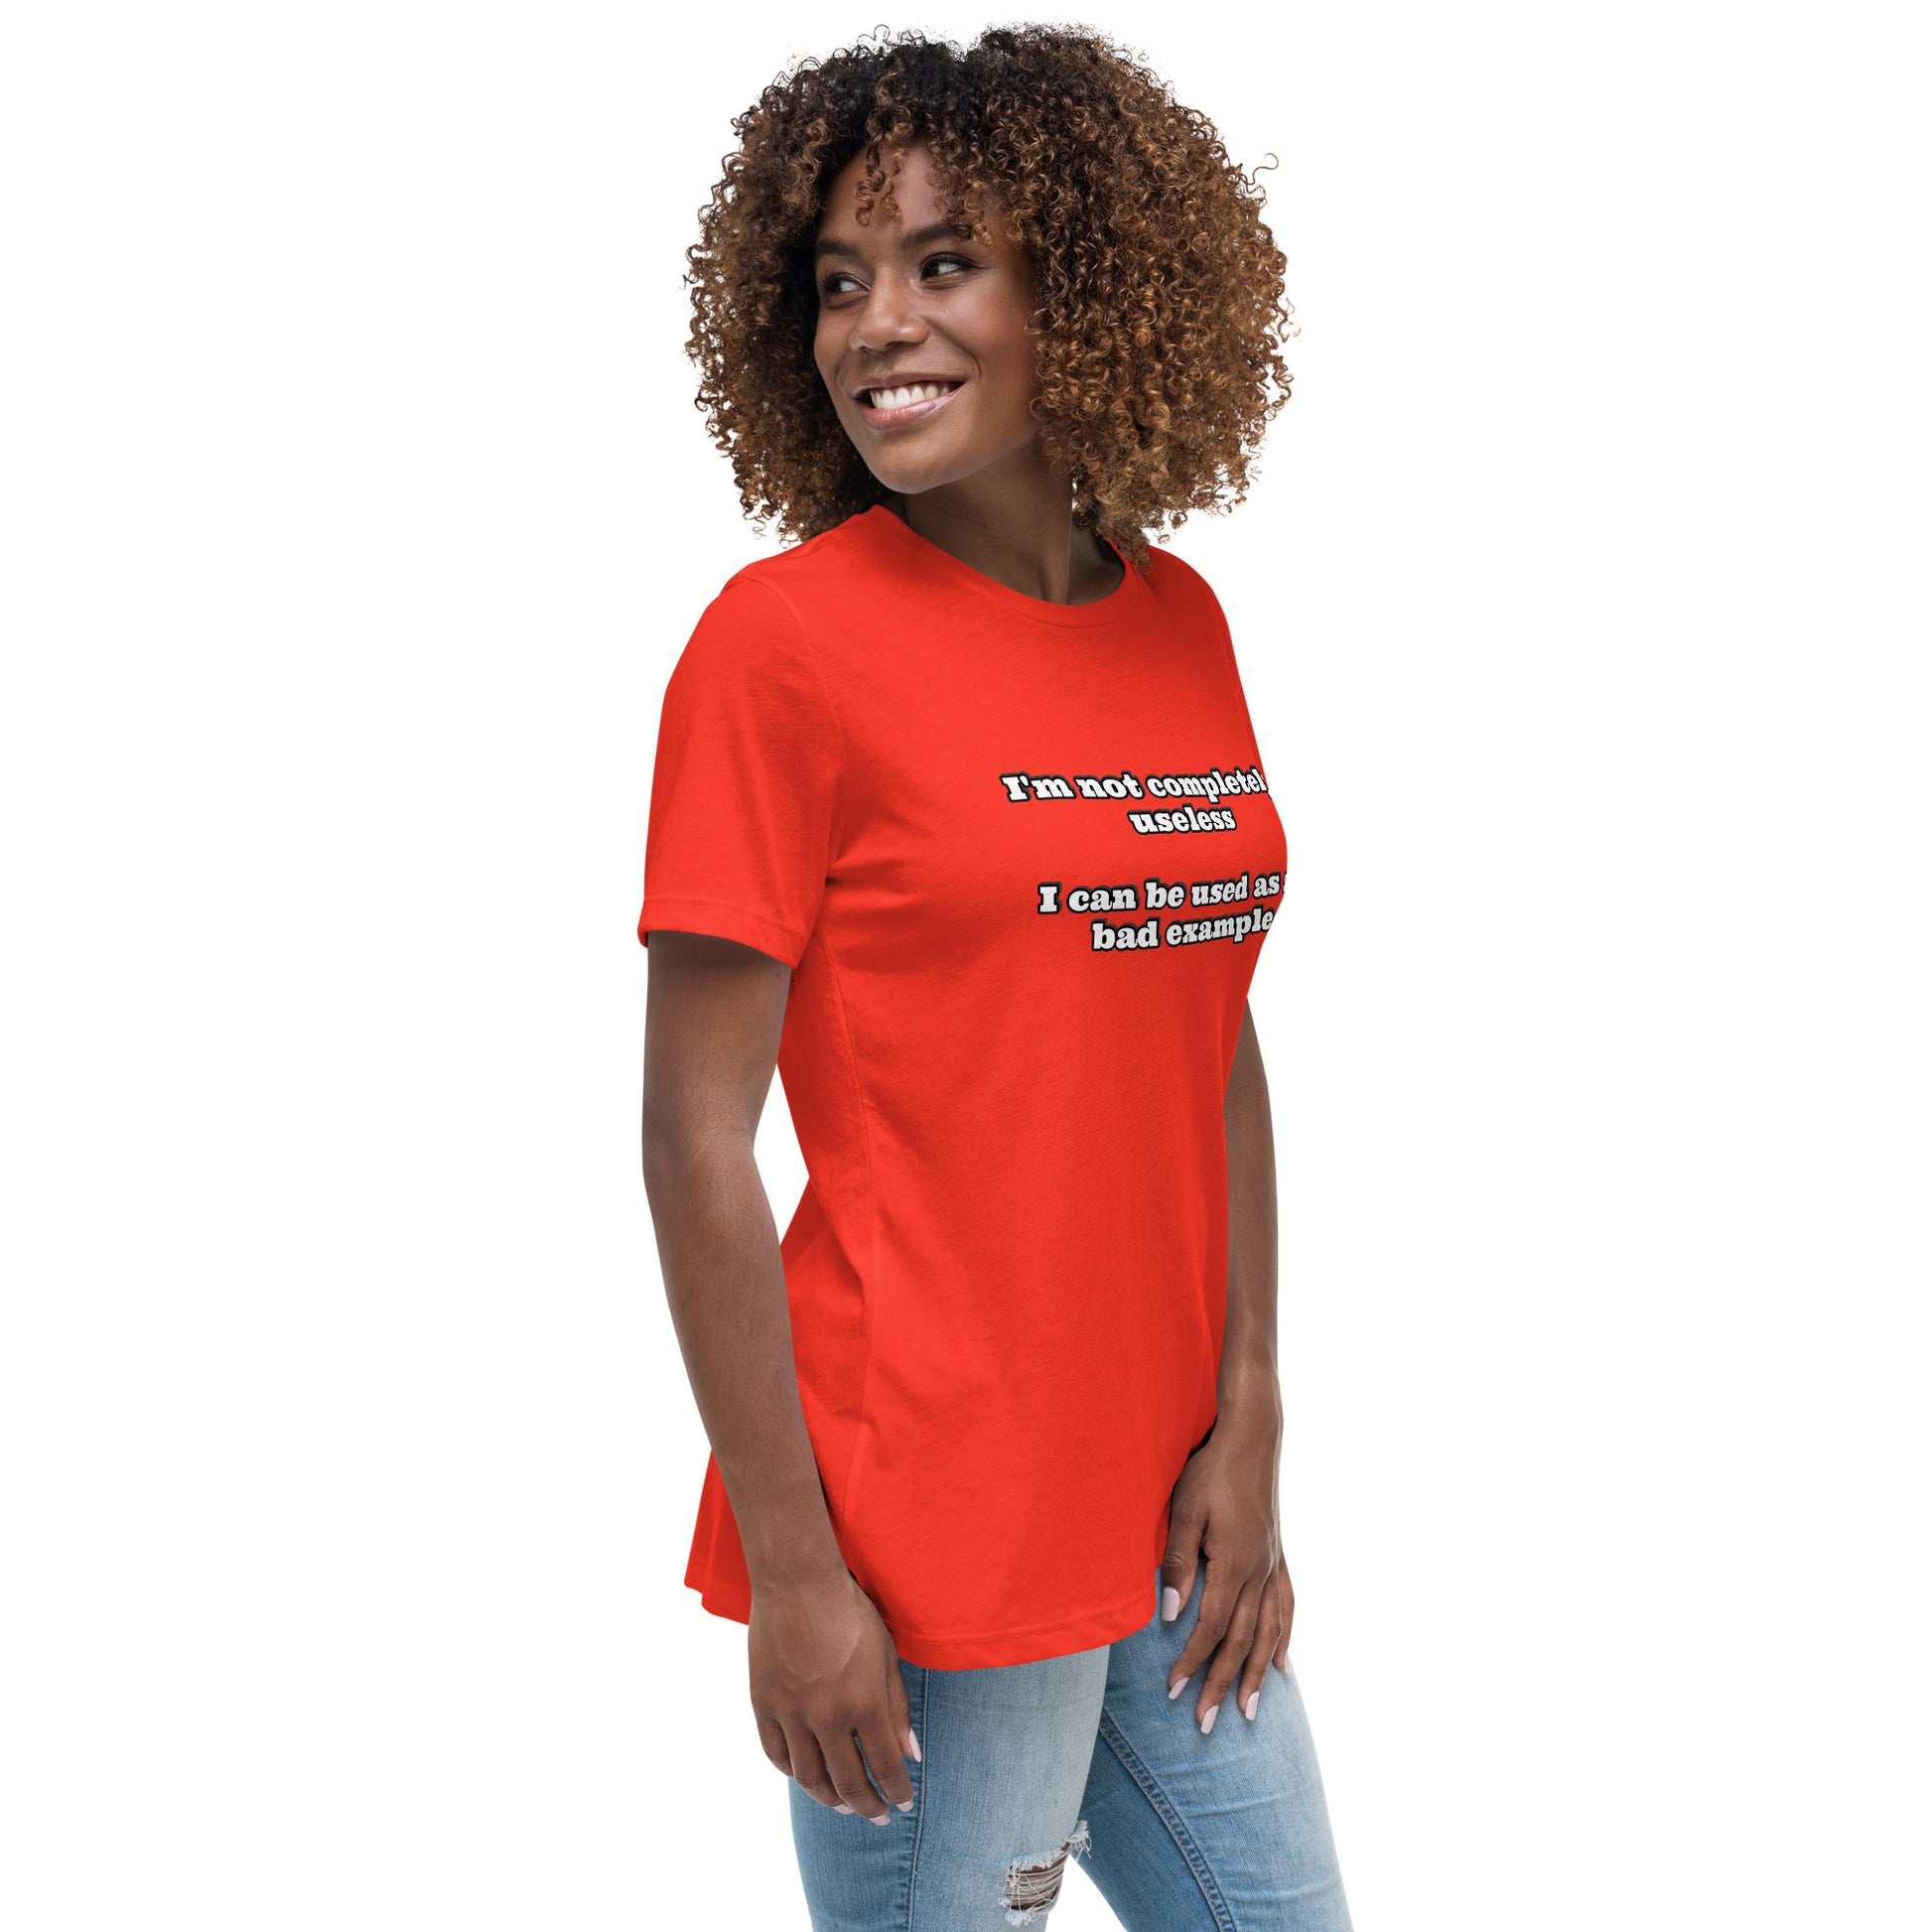 Women with red t-shirt with text “I'm not completely useless I can be used as a bad example”